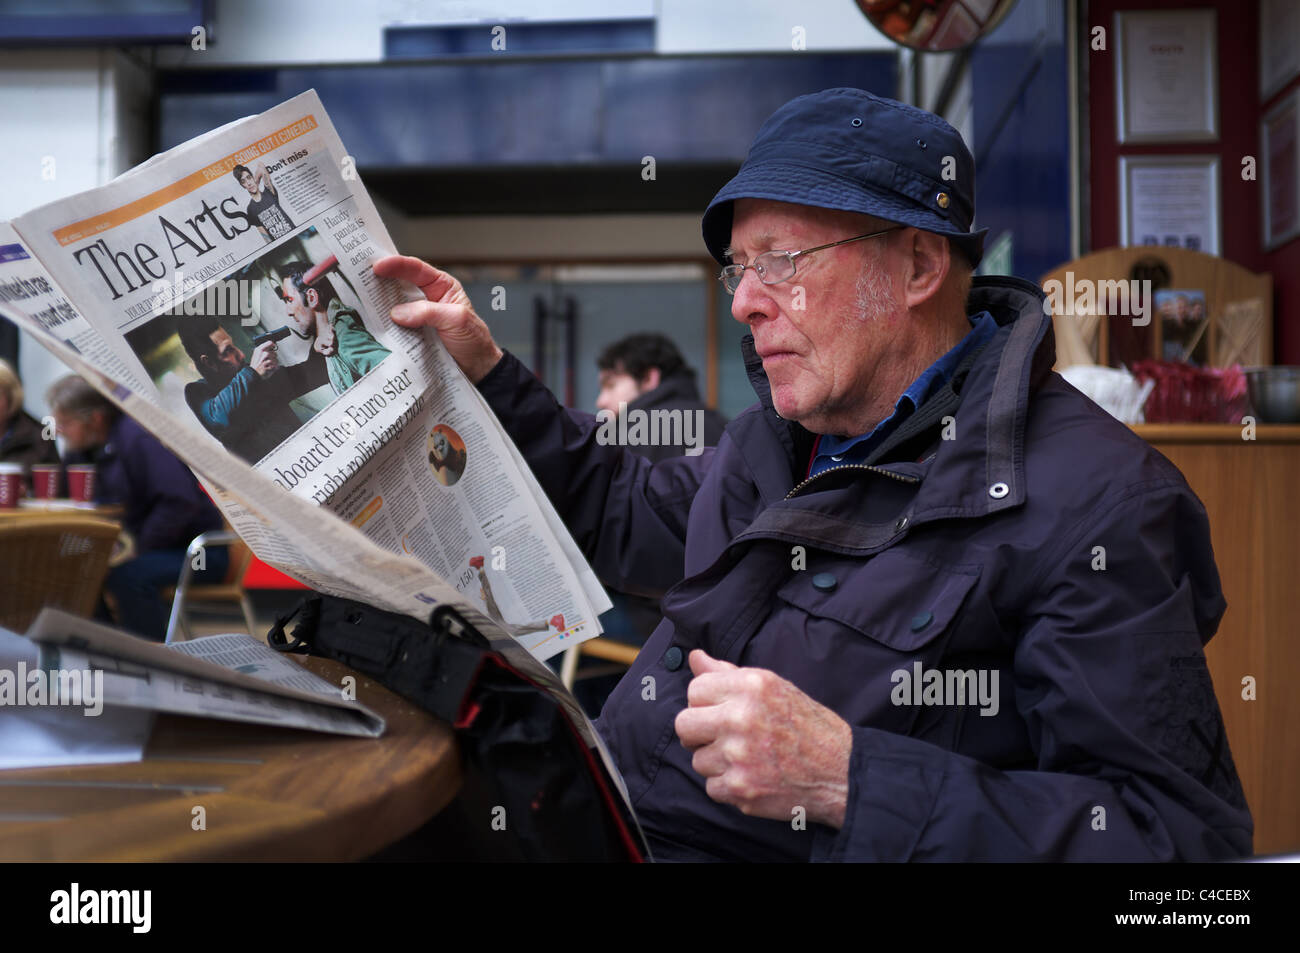 Man sitting in cafe reading a newspaper, Queen Street Railway station, Glasgow, Scotland, UK Stock Photo